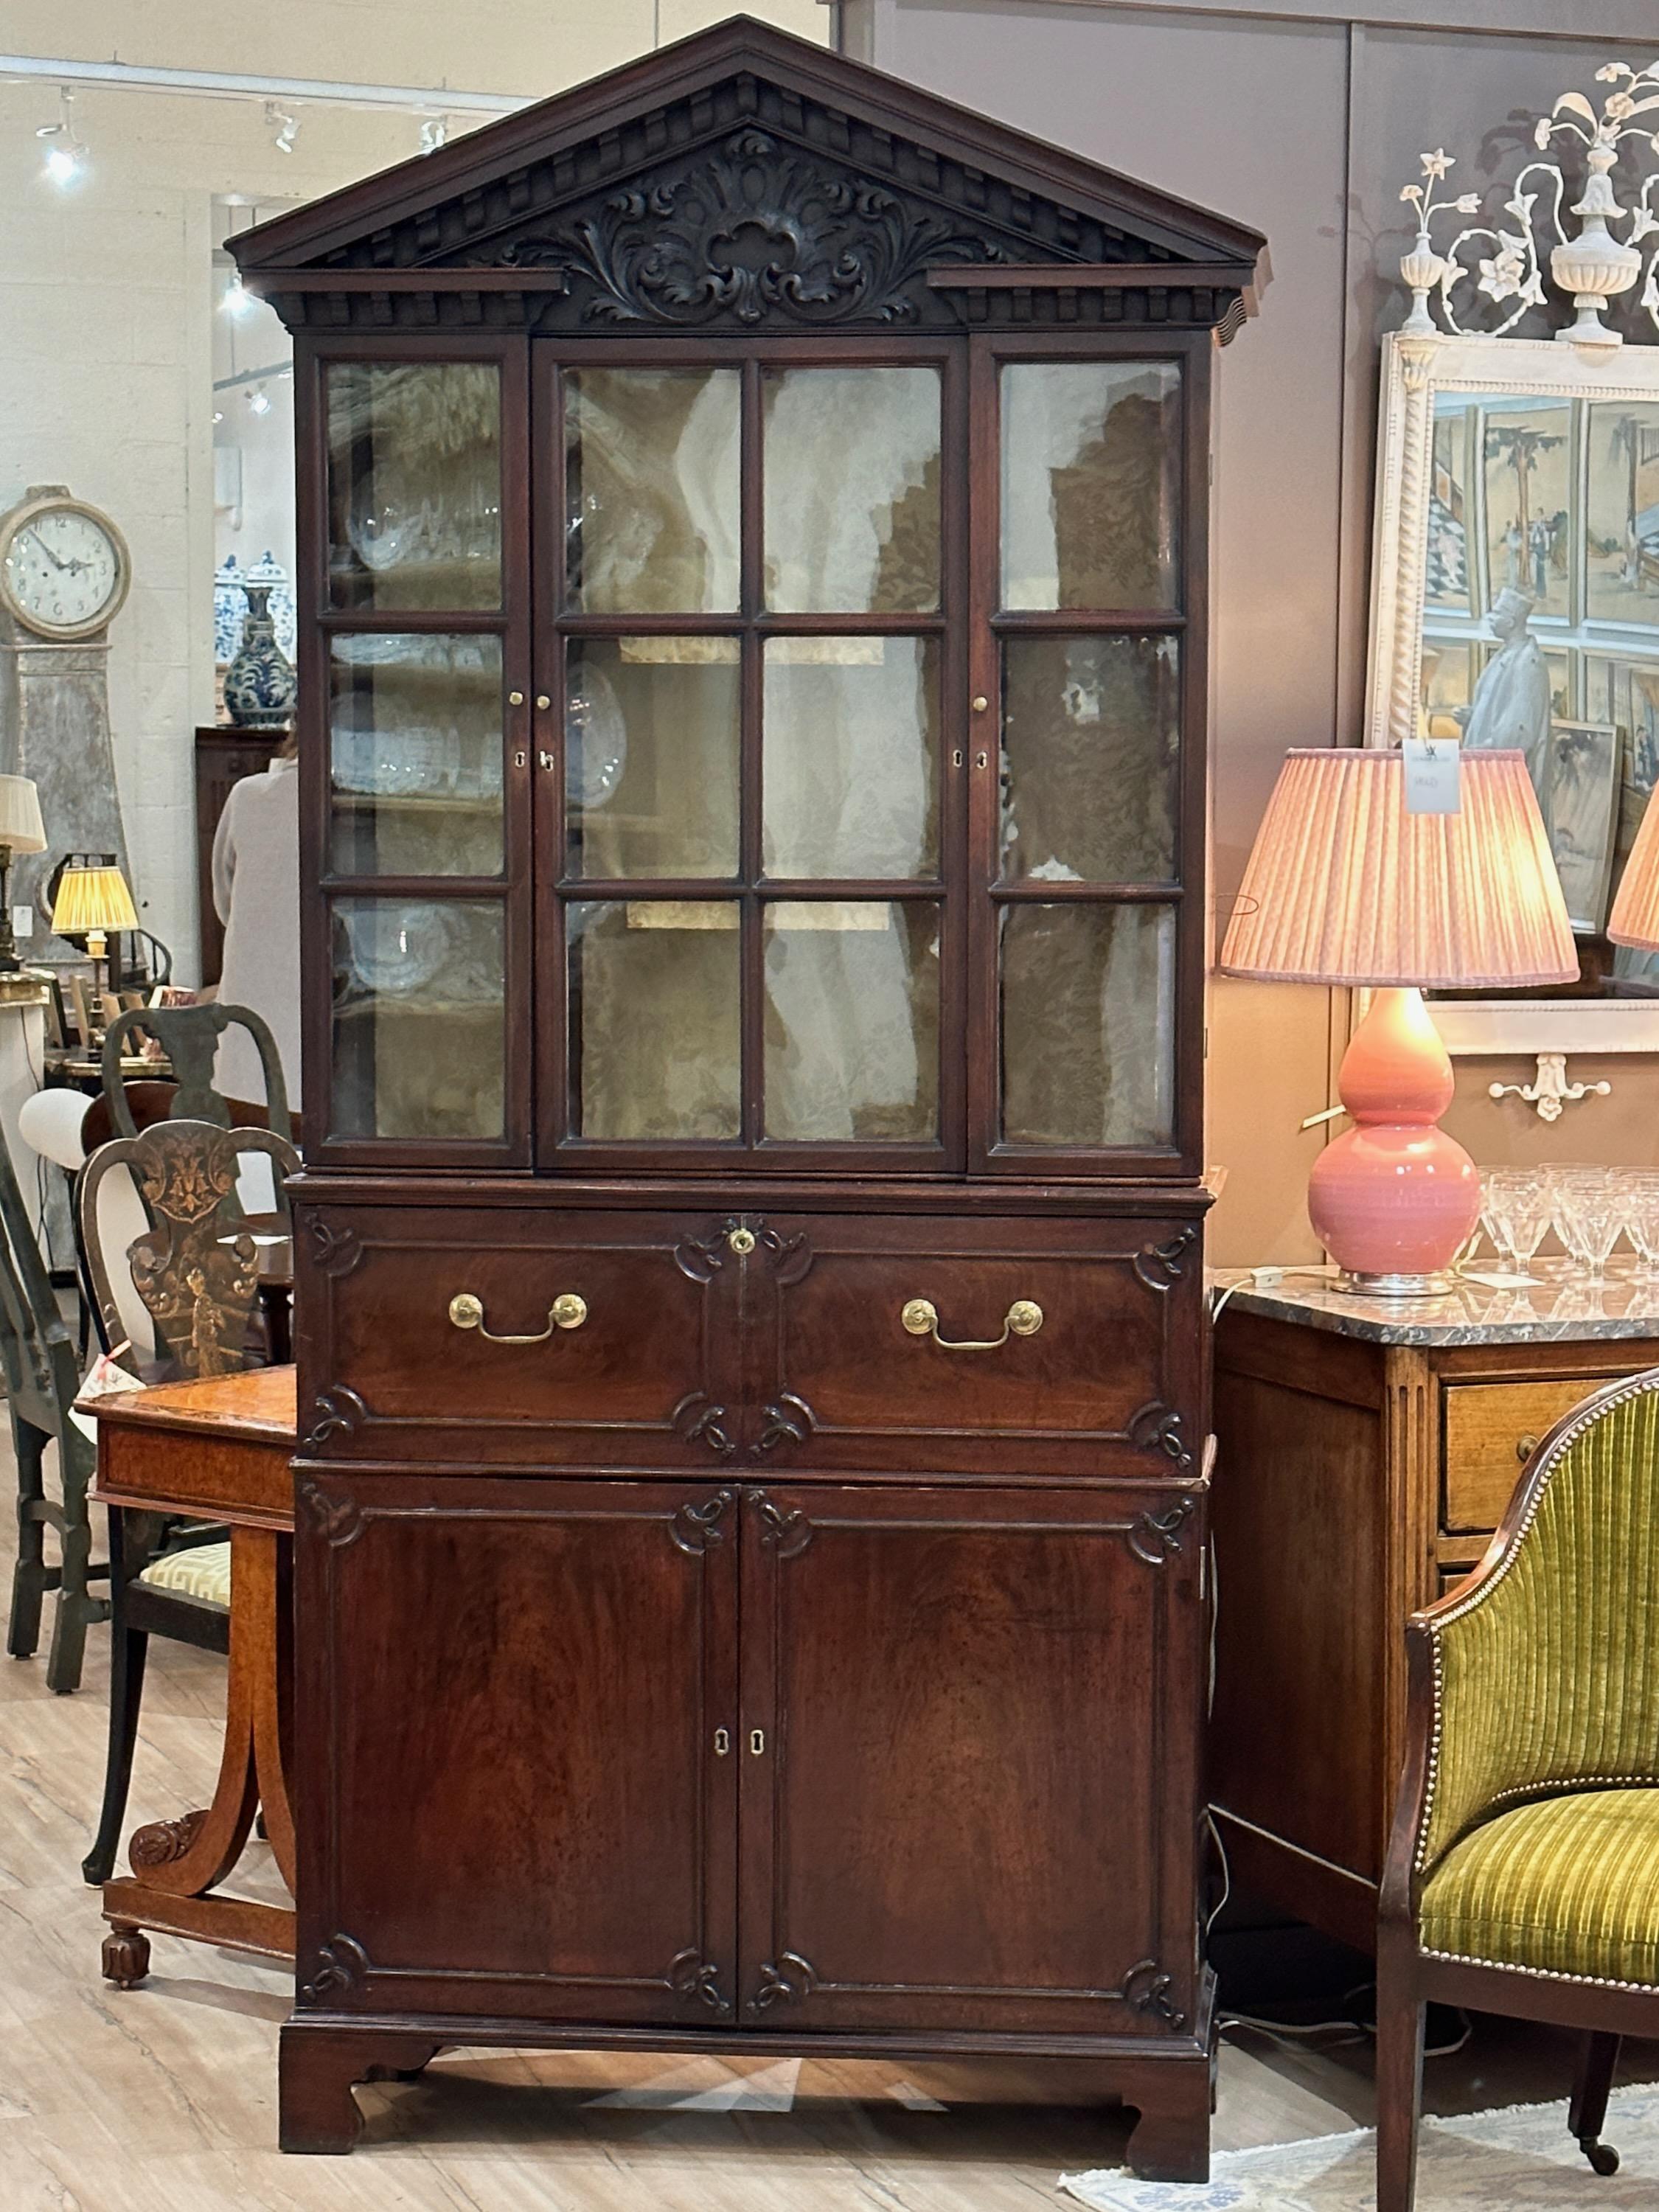 An unusually small and elegant late 18th century carved mahogany secretary bookcase. The intricately carved pediment sits atop a bookcase with three glass fronted doors over a drop front secretary desk with drawers and pigeon holes above two lower